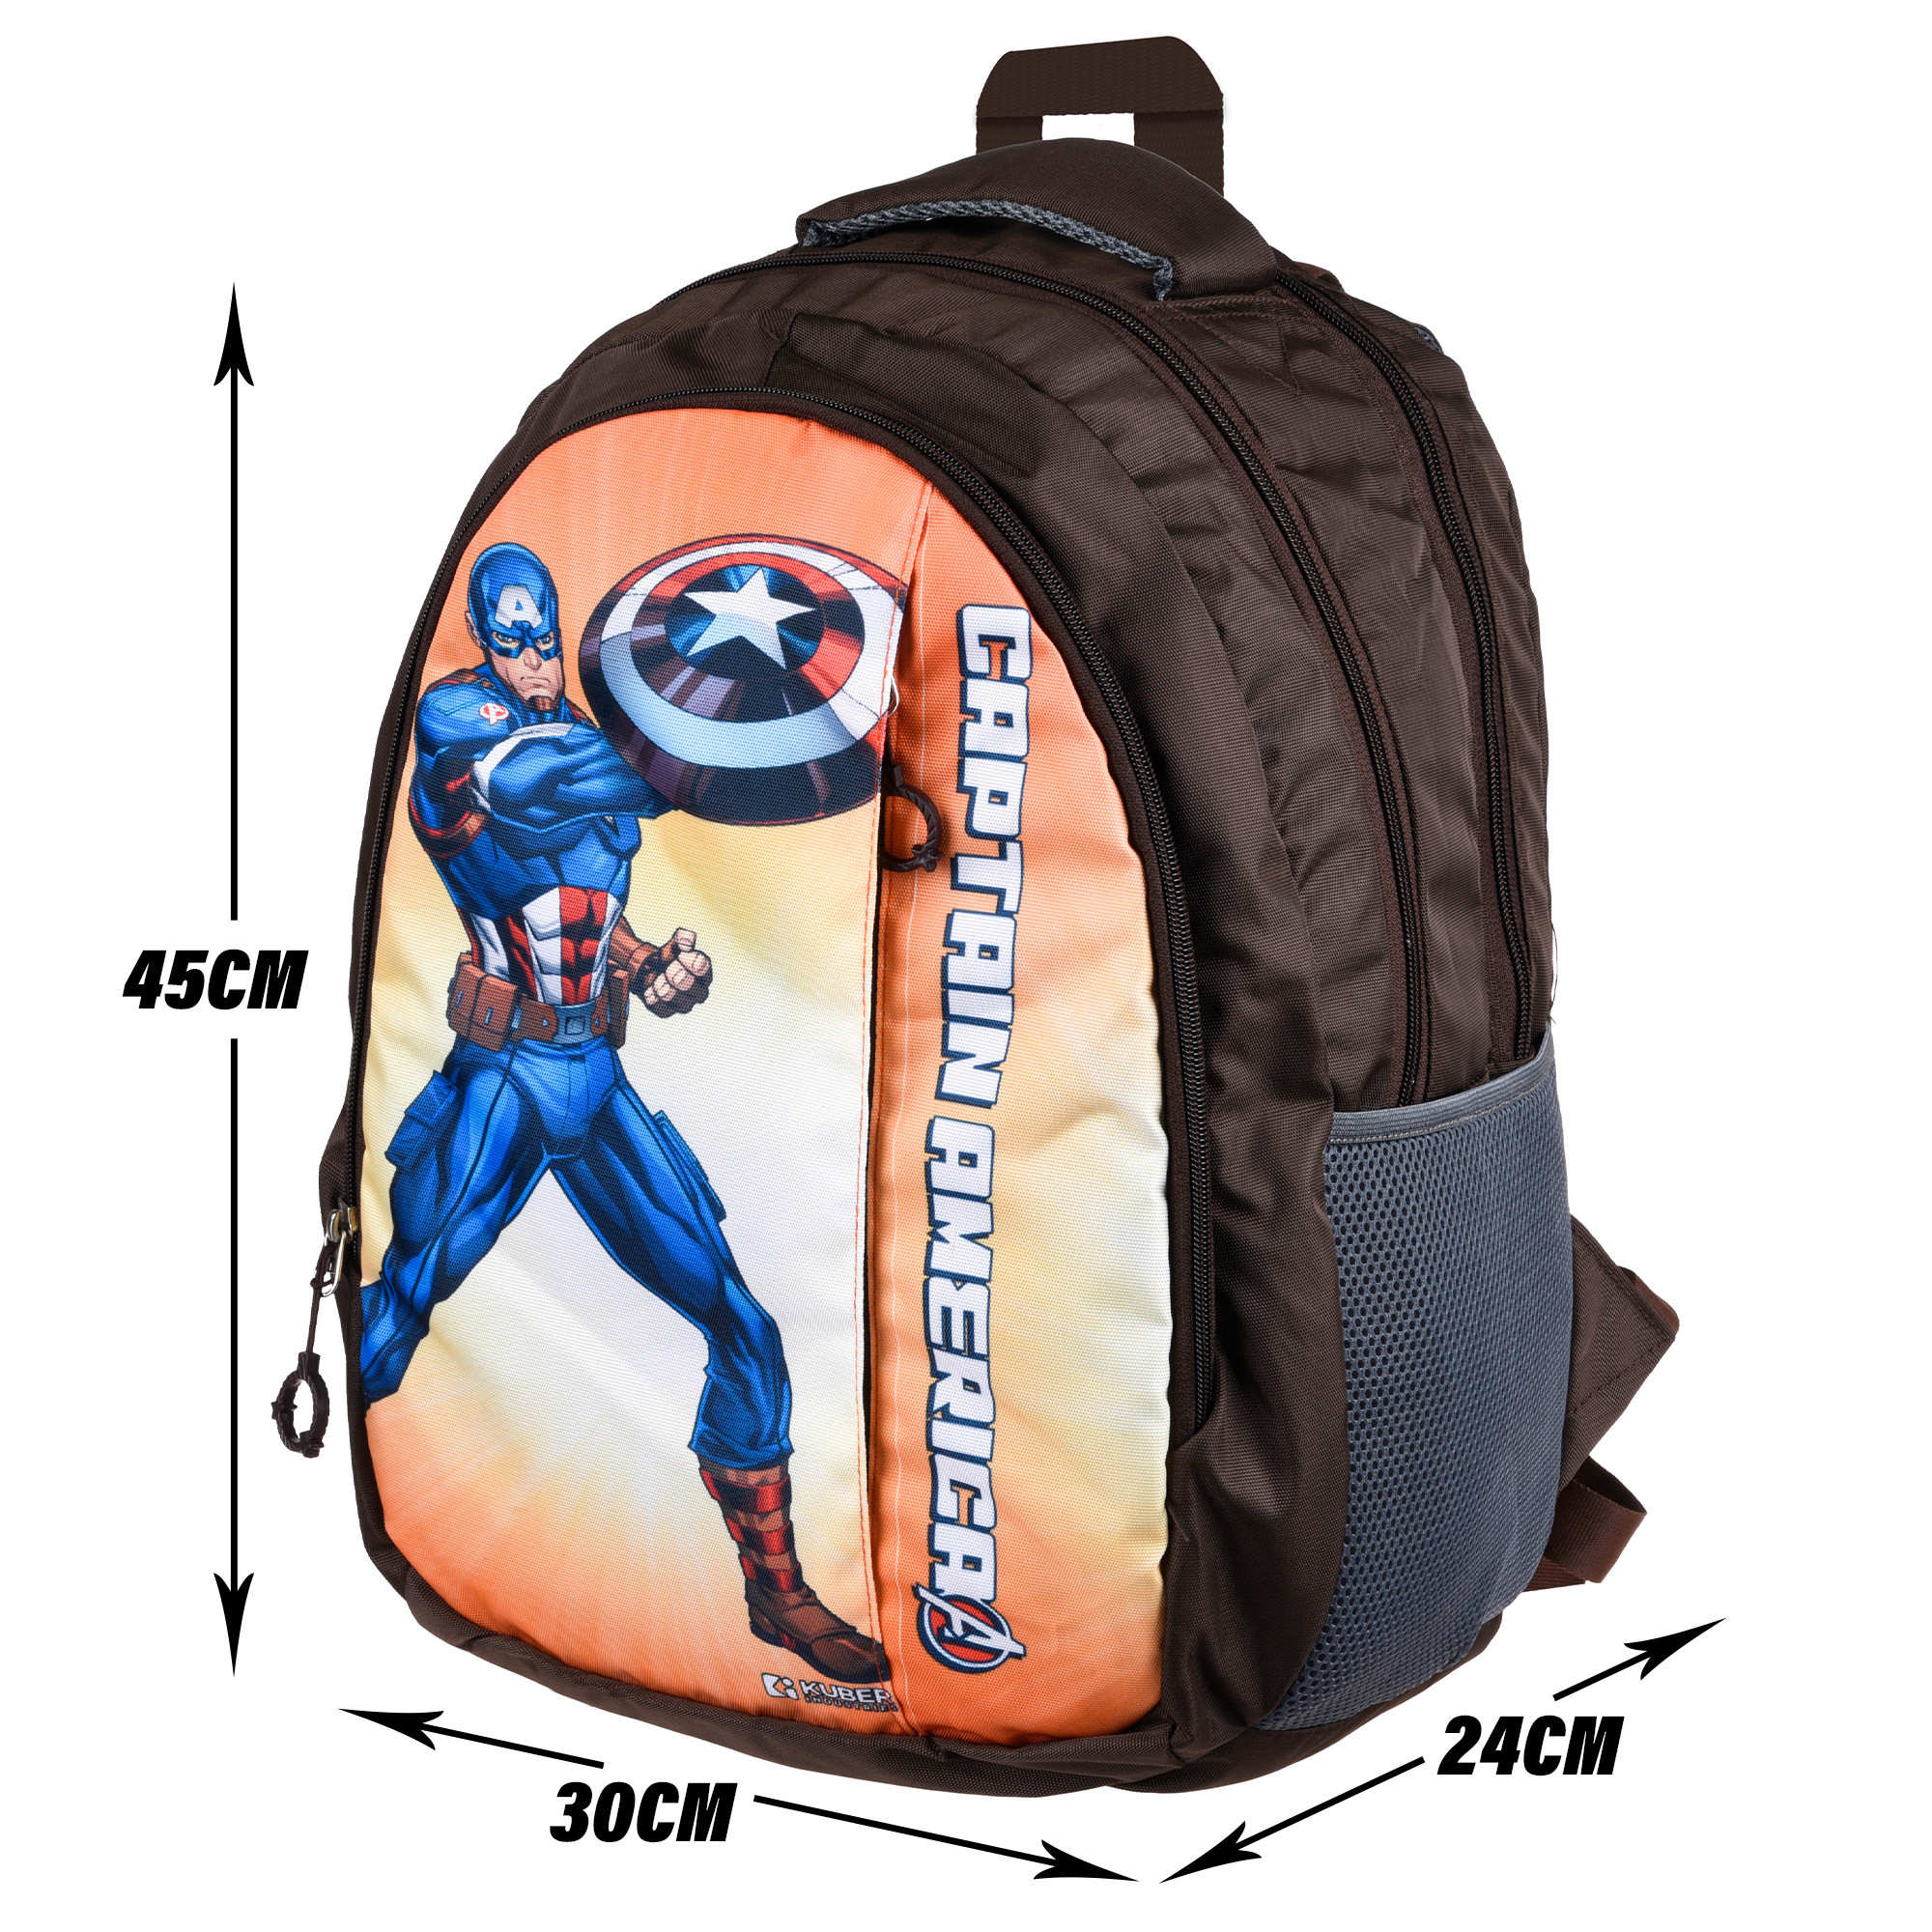 Kuber Industries Marvel Captain America School Bags | Kids School Bags | Collage Bookbag | Travel Backpack | School Bag for Girls & Boys | School Bag with 5 Compartments | Include Bag Cover | Brown